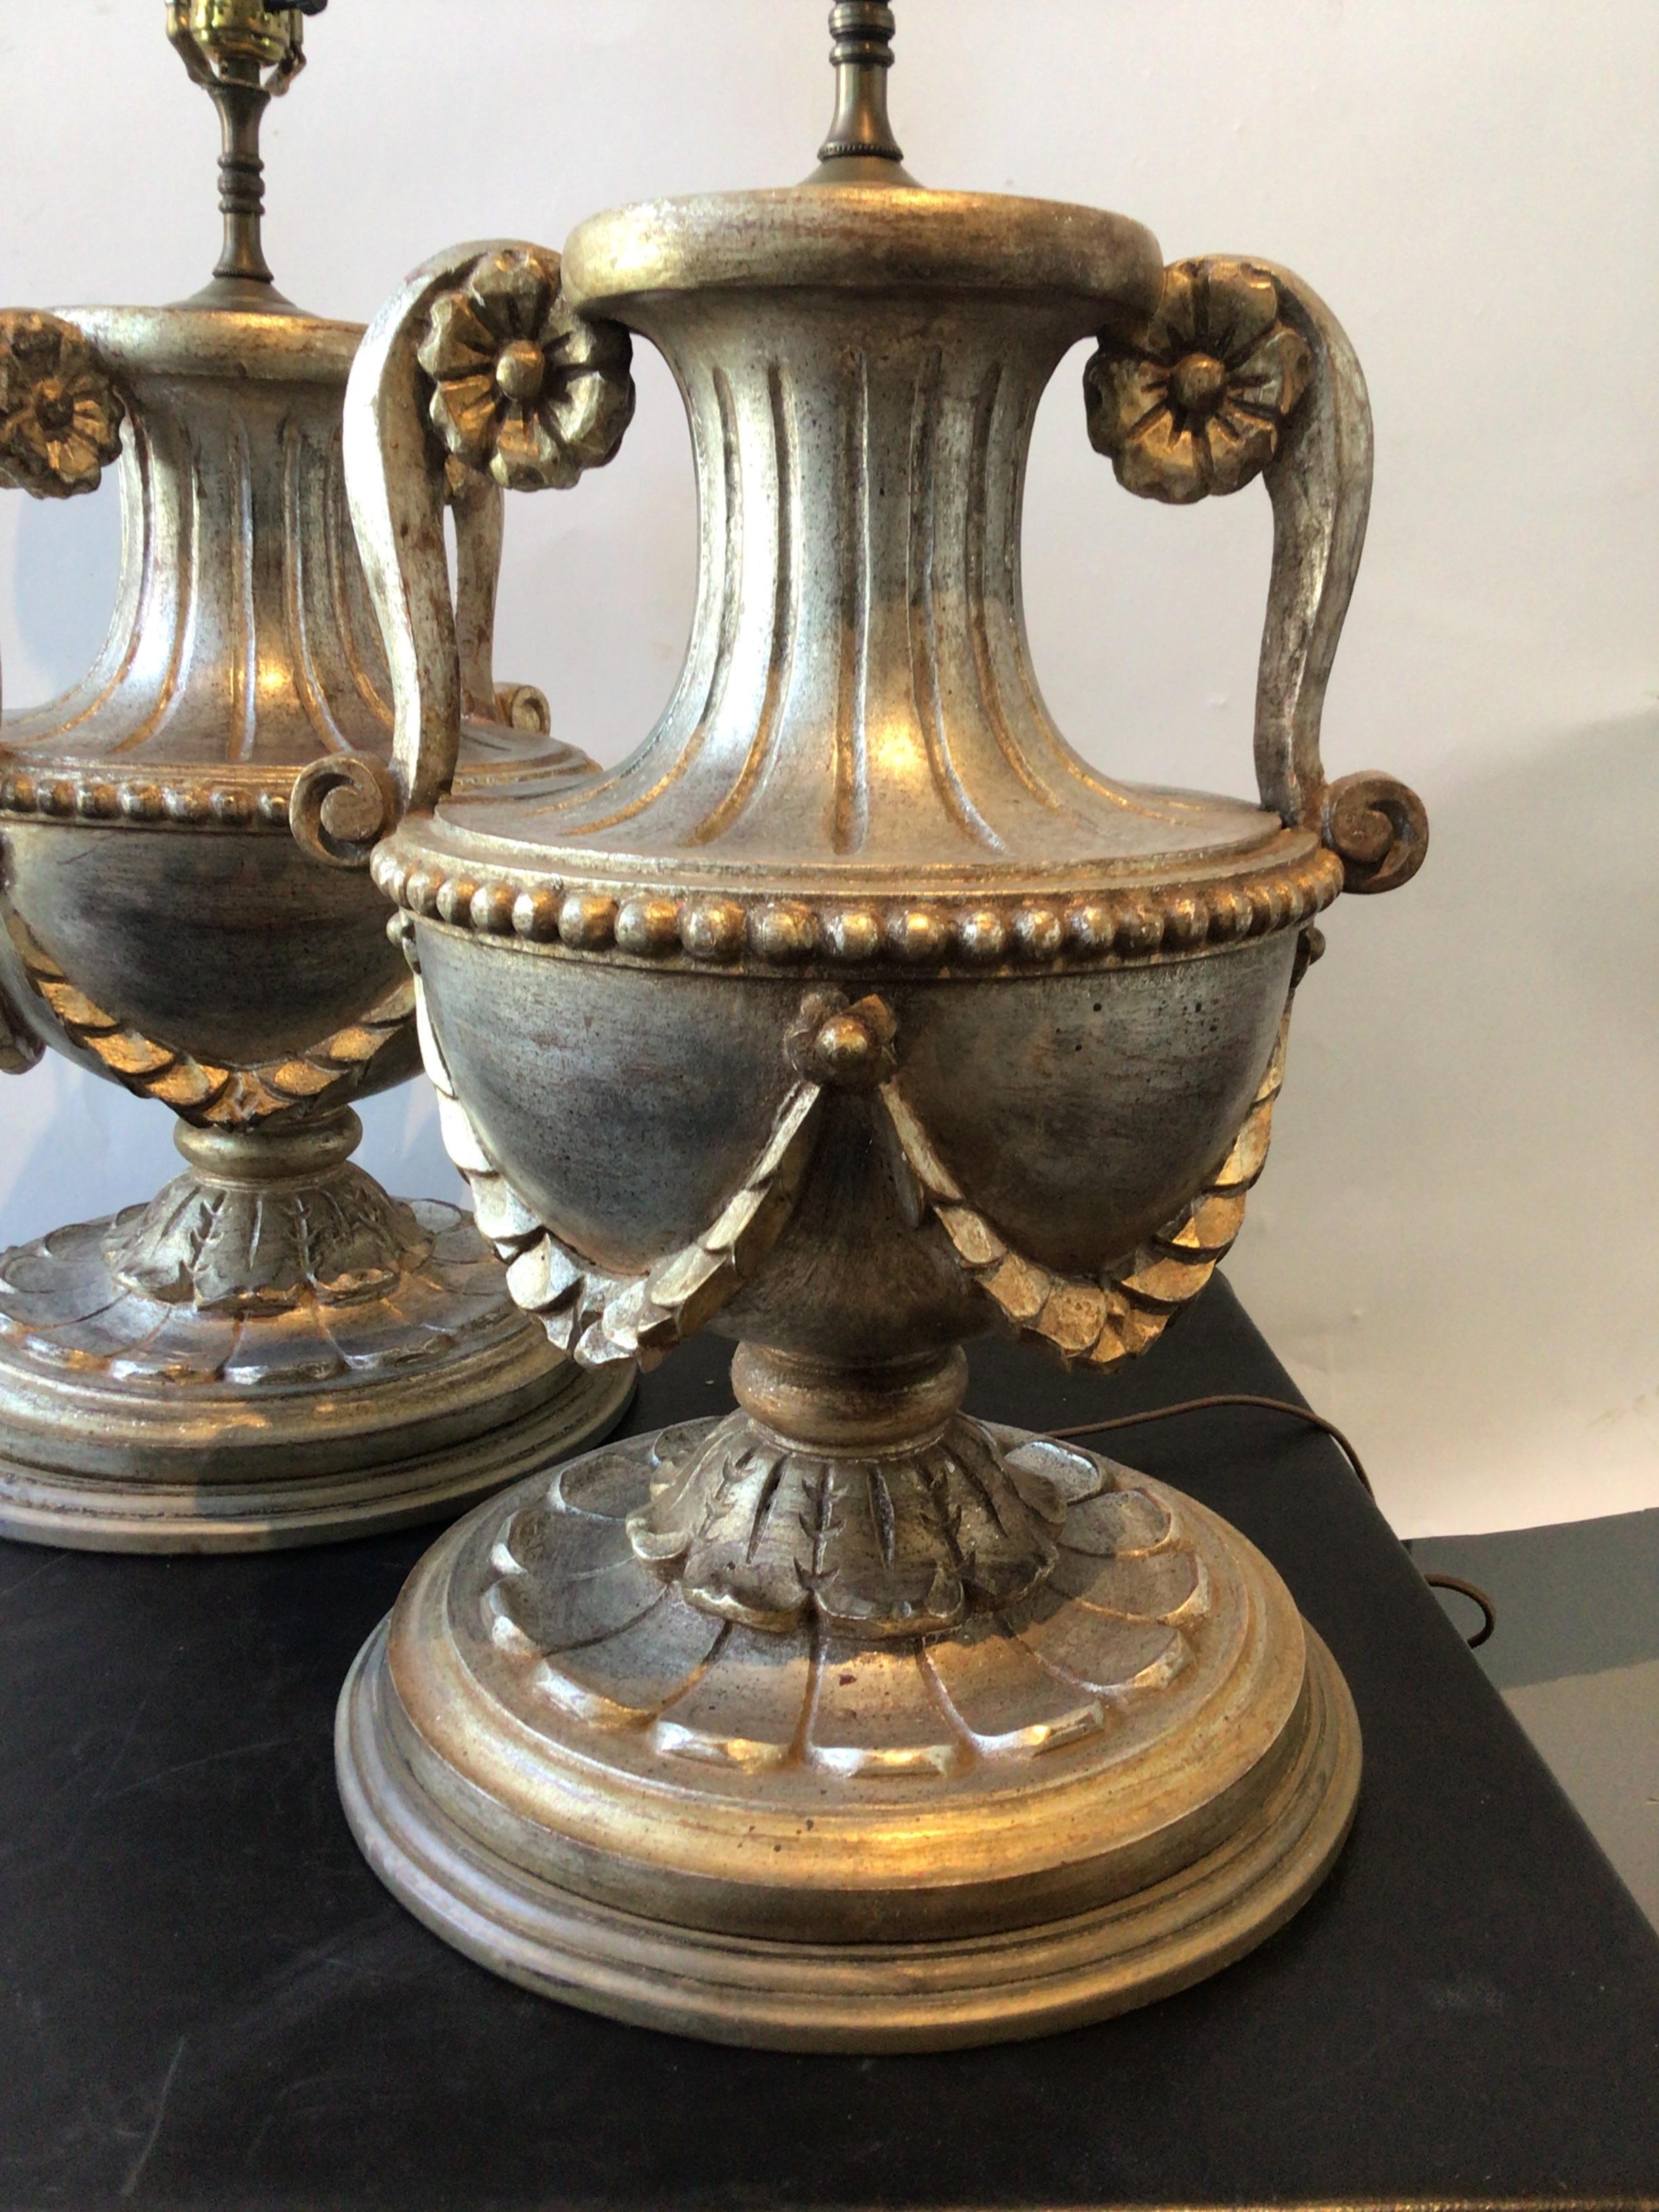 Pair of large 1950s Italian hand carved wood silver leaf urn lamps. Wood finial. From a very famous media moguls Hamptons estate.